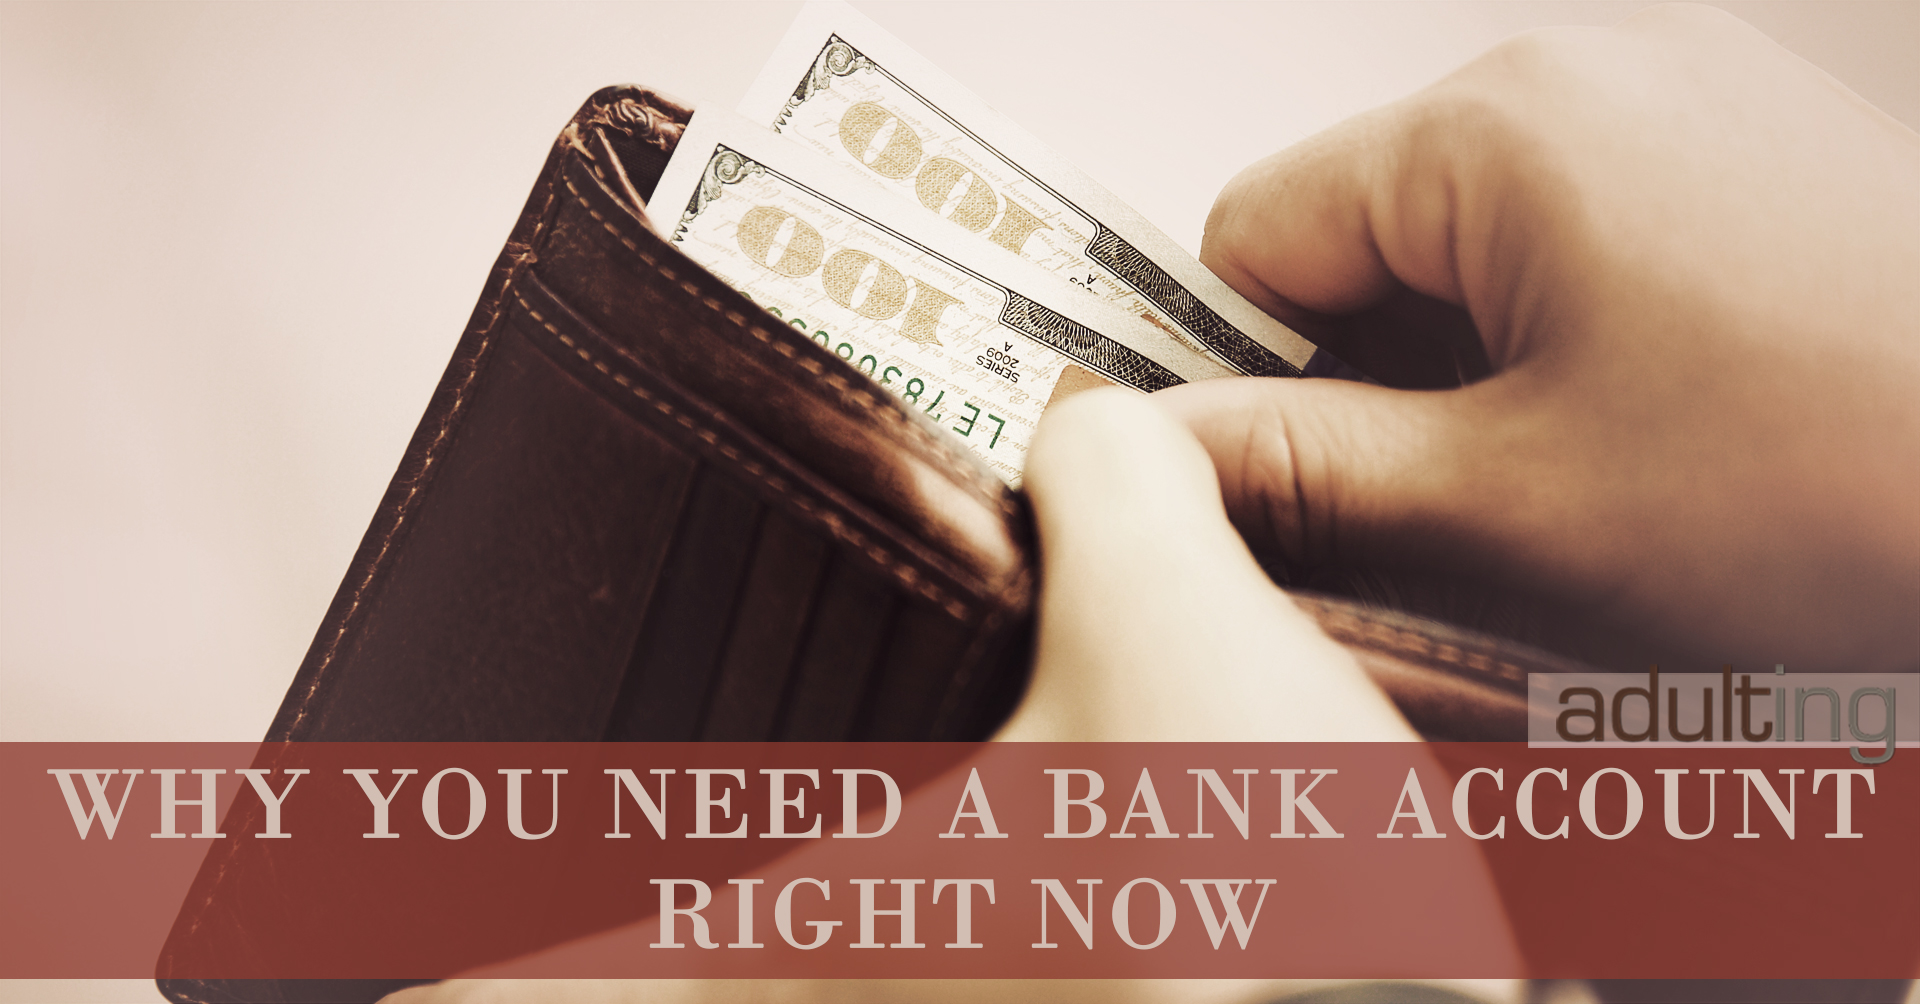 Why You Need a Bank Account Right Now